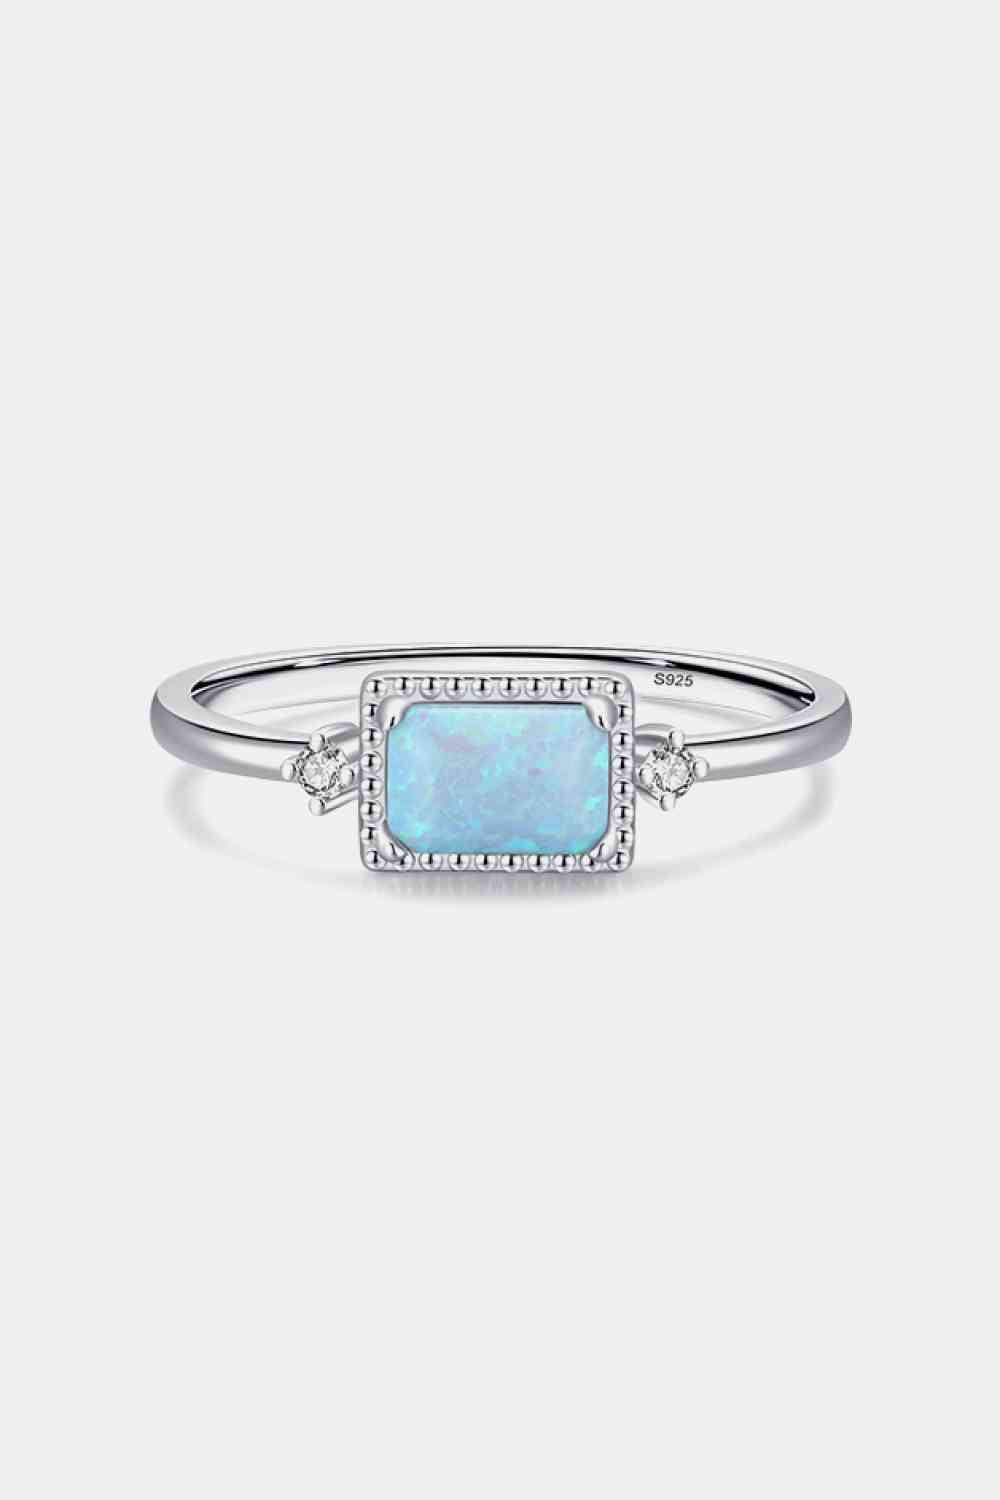 Emerald Cut Opal Ring with Zircon Accents